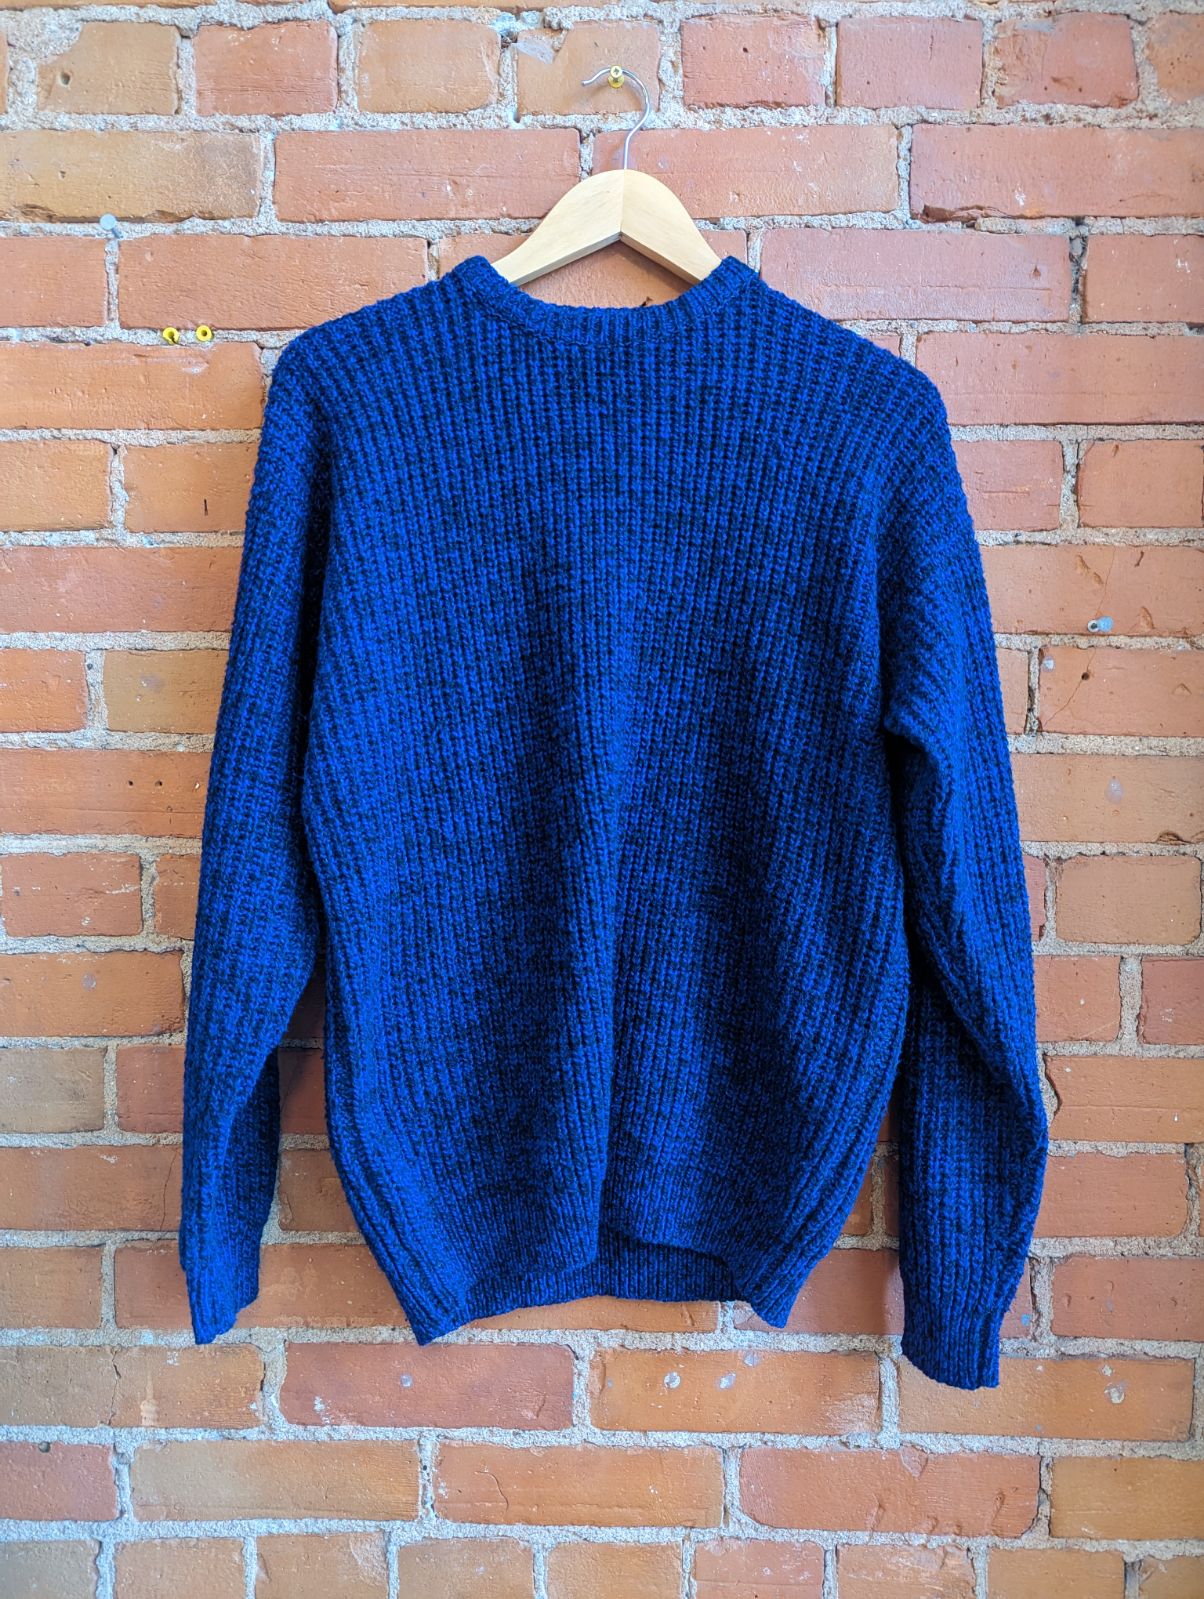 1980s Pause International Blue and Black Marled Knit Sweater